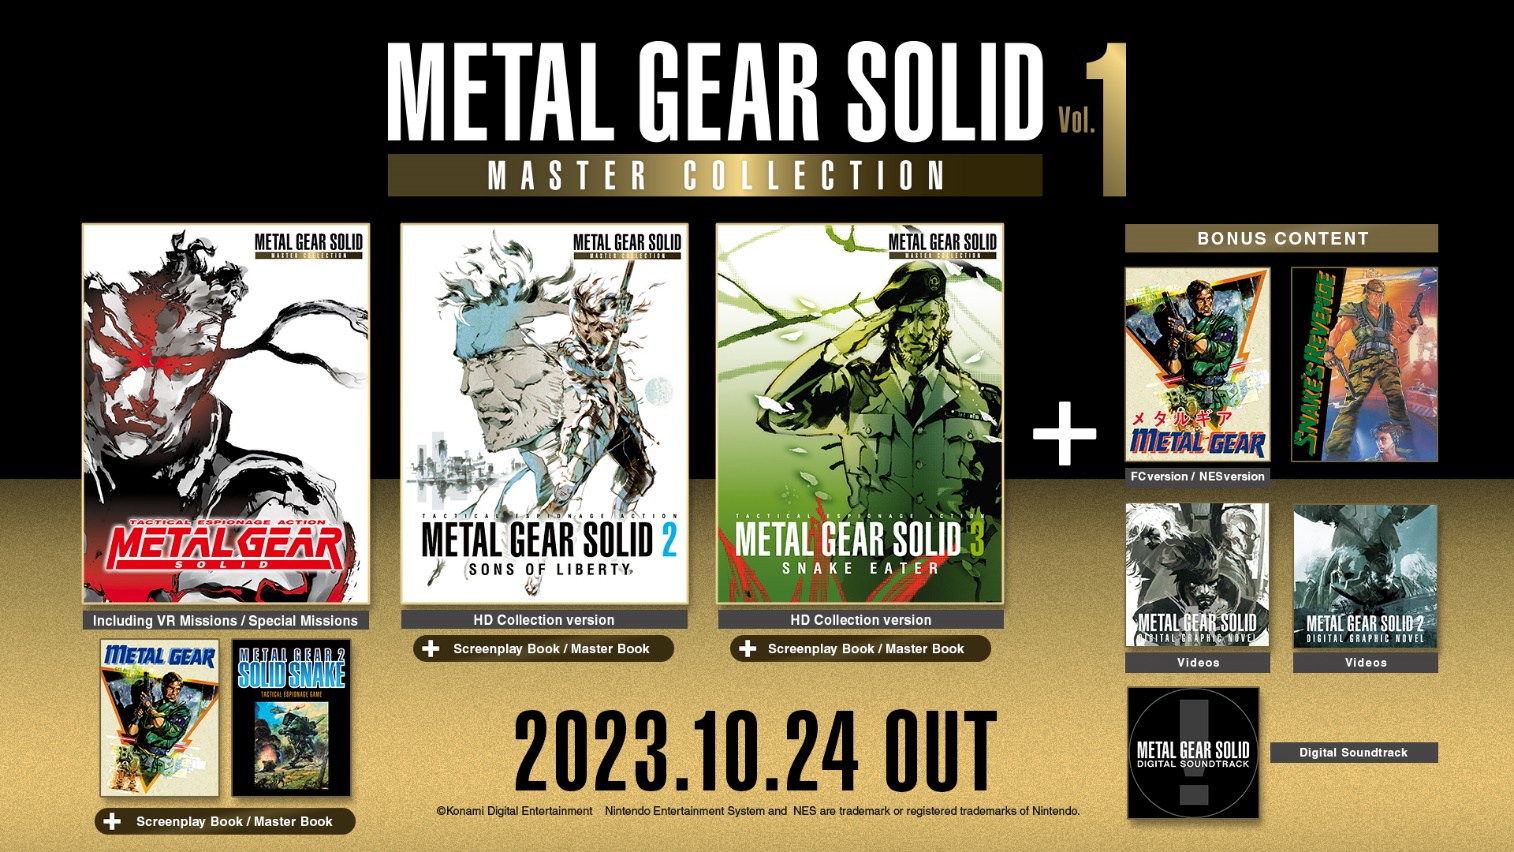 Metal Gear Solid Master Collection Vol. 1 Releasing Nintendo Switch October 2023